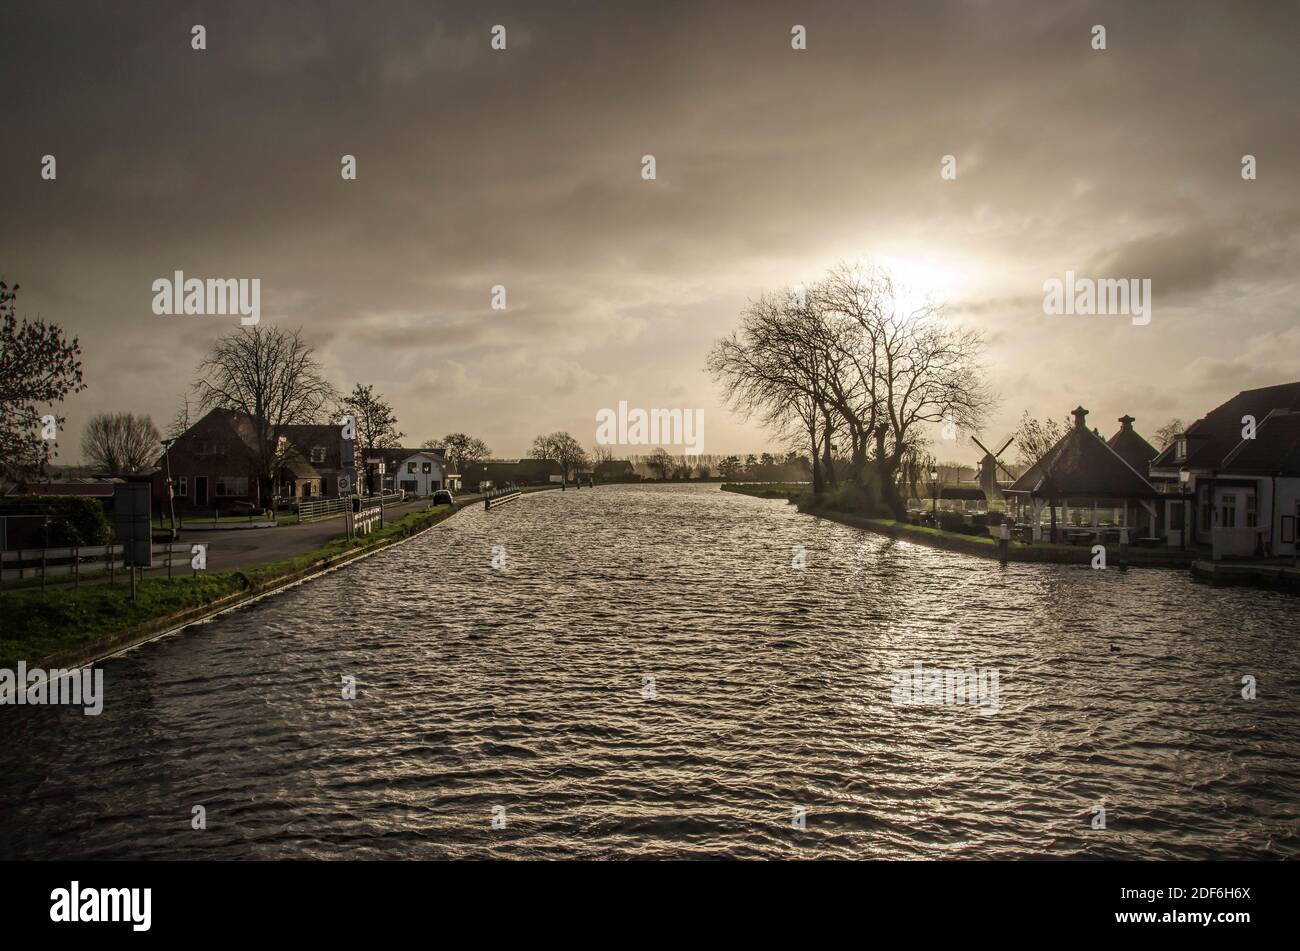 Dramatic light over Vliet canal and surrounding polder landscape with houses and a windmill near Voorschoten, The Netherlands Stock Photo